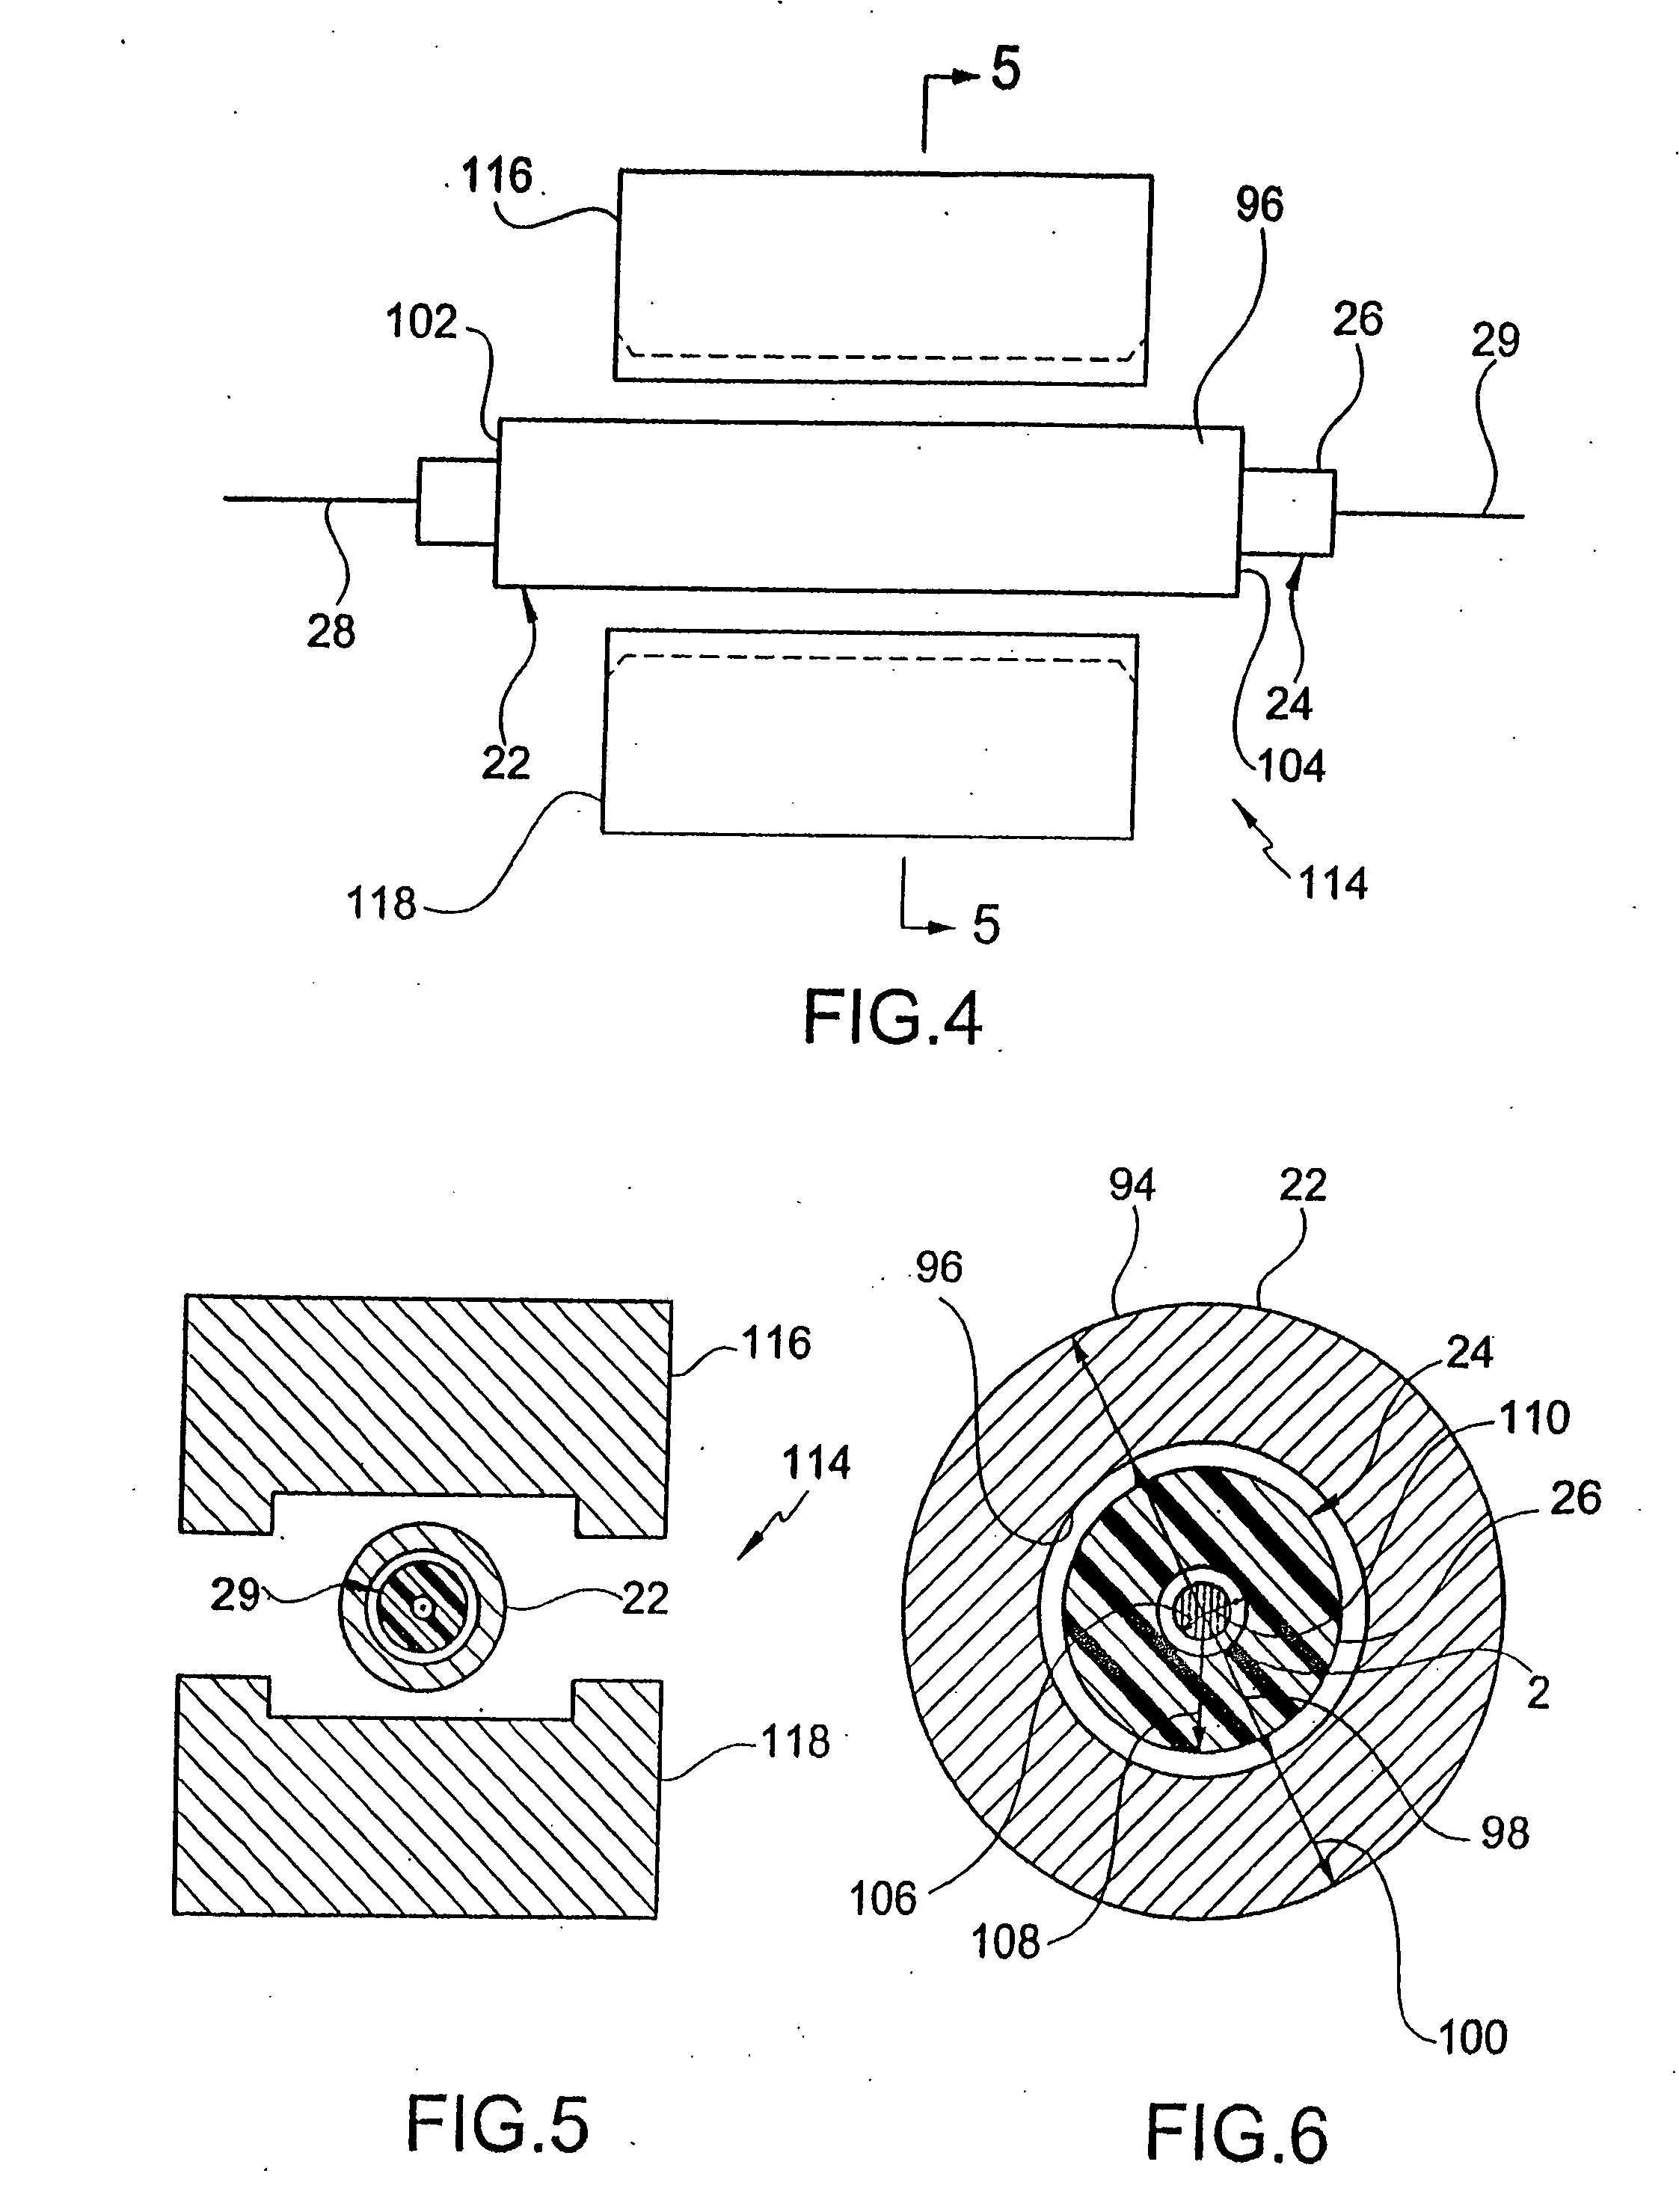 Crimp tool for strain relief connector and method of forming a strain relief connector